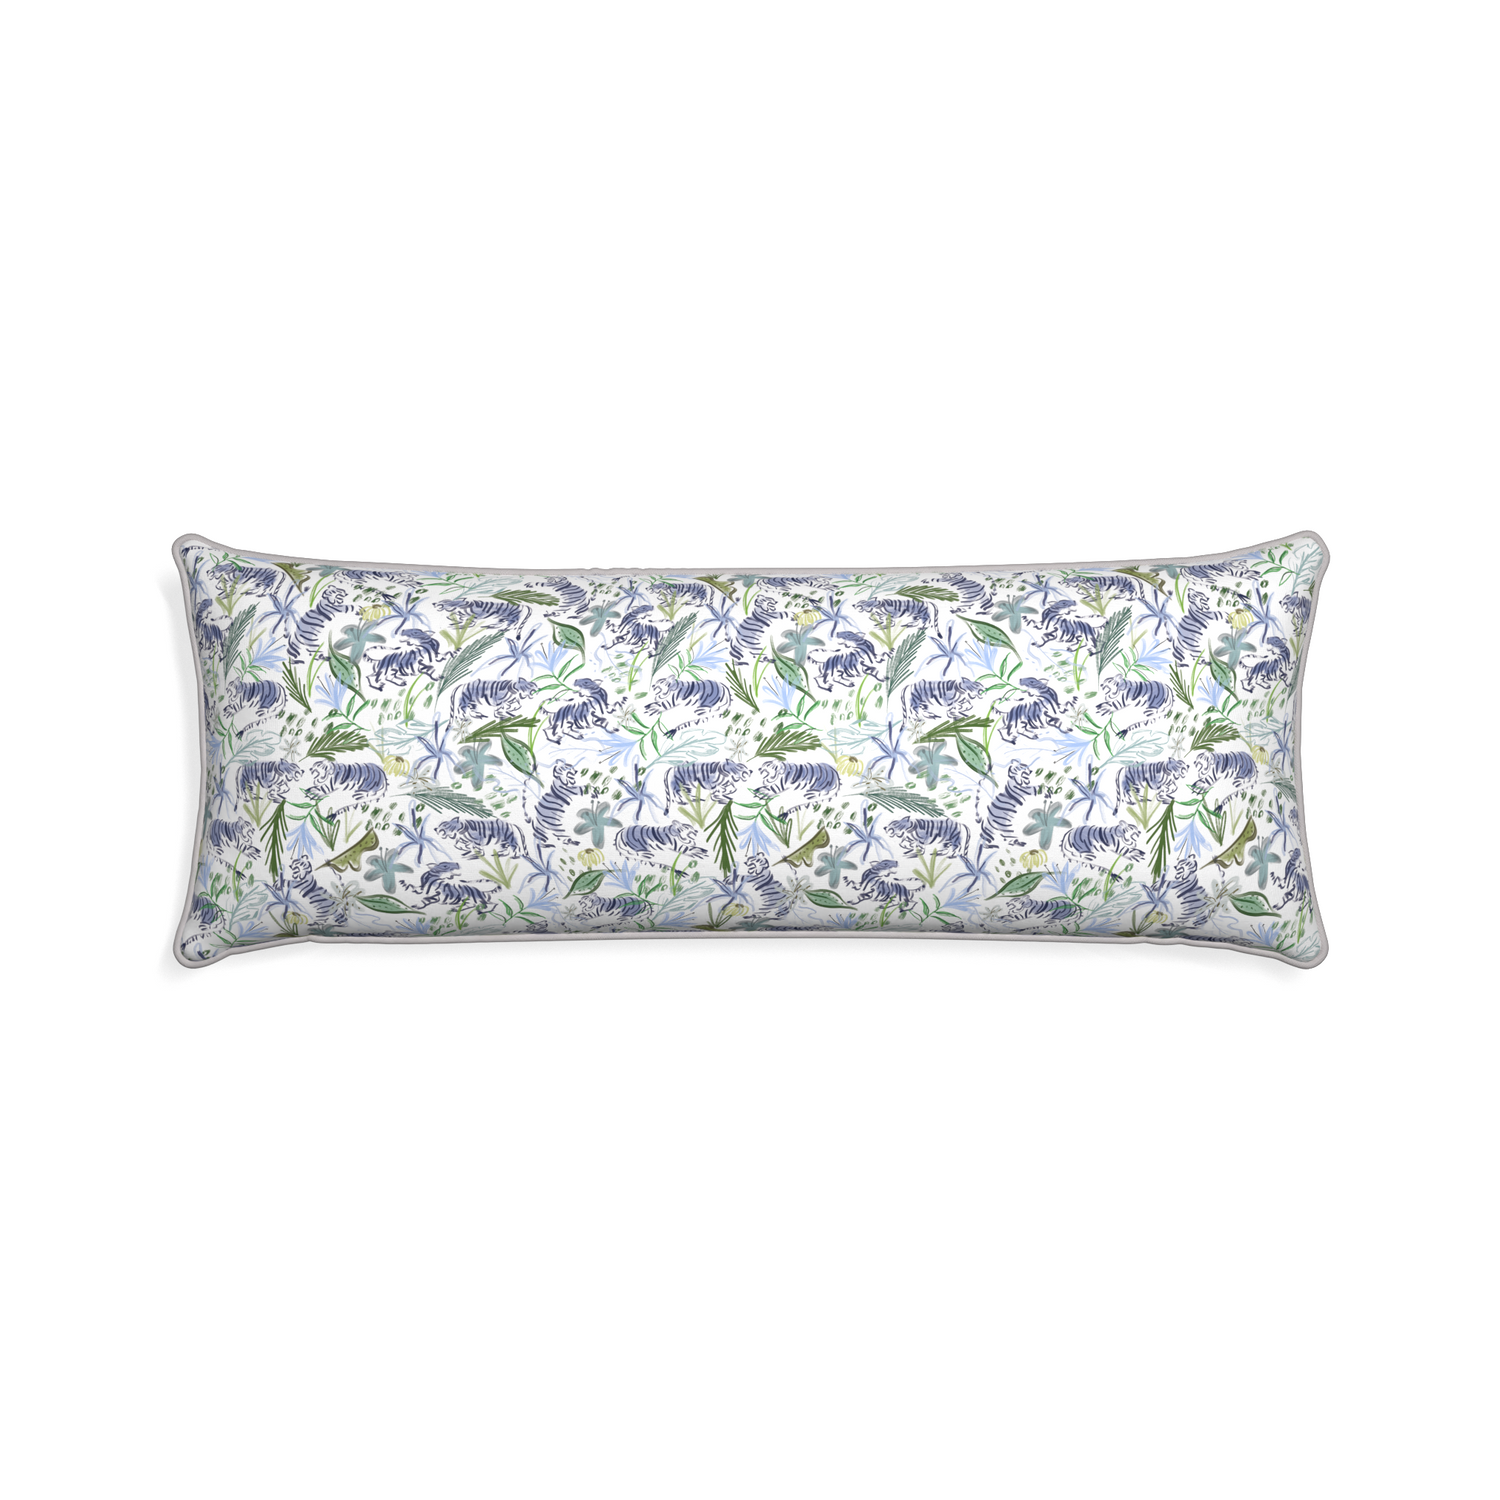 Xl-lumbar frida green custom green tigerpillow with pebble piping on white background